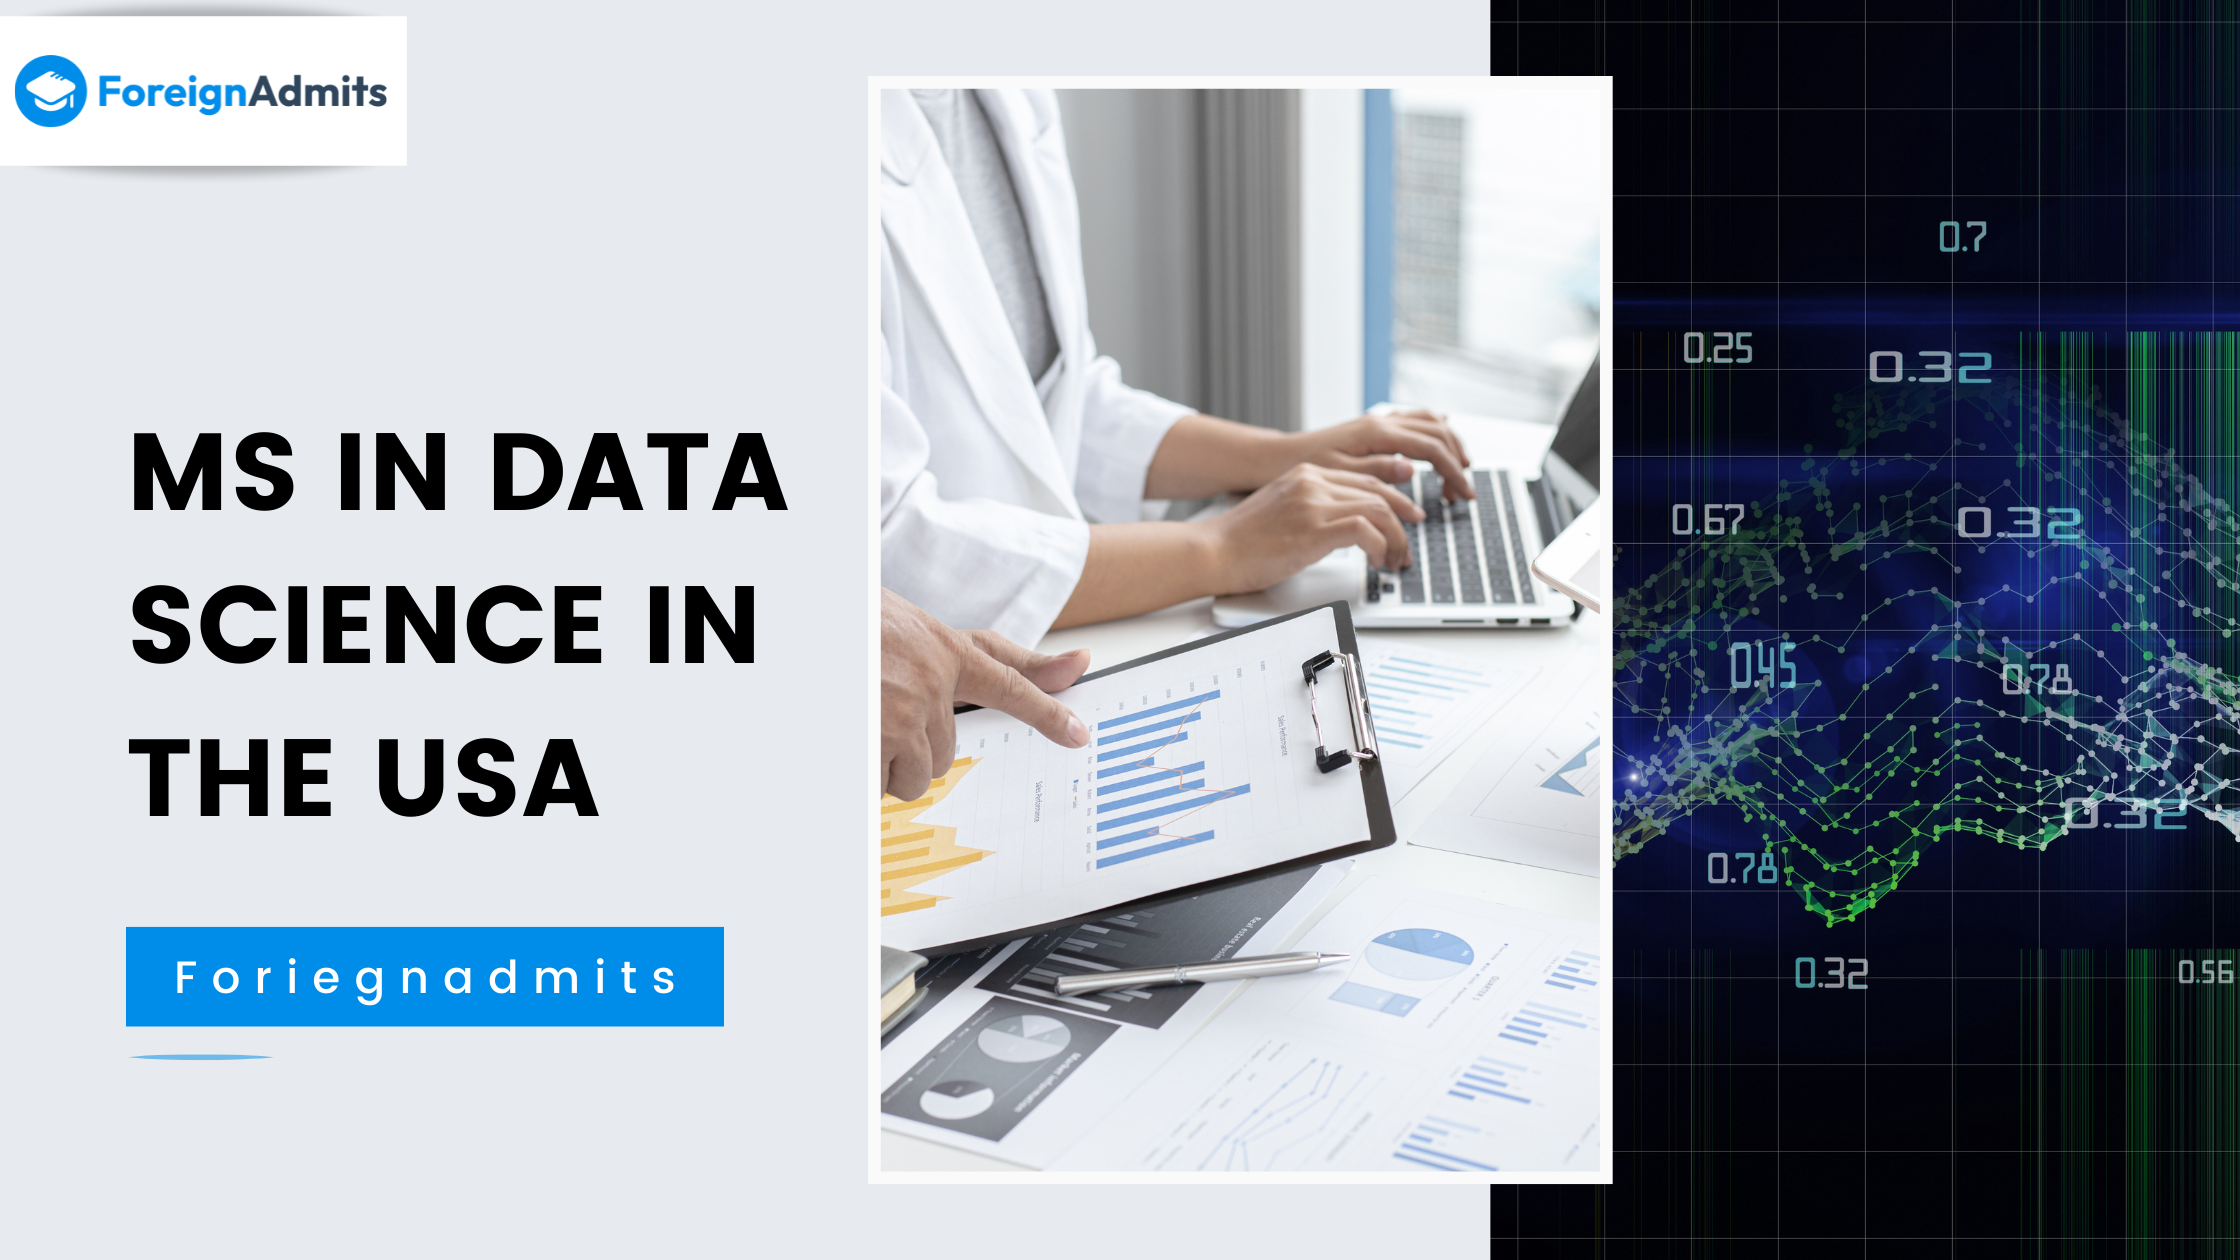 Know the Best Universities to do MS in Data Science in the USA